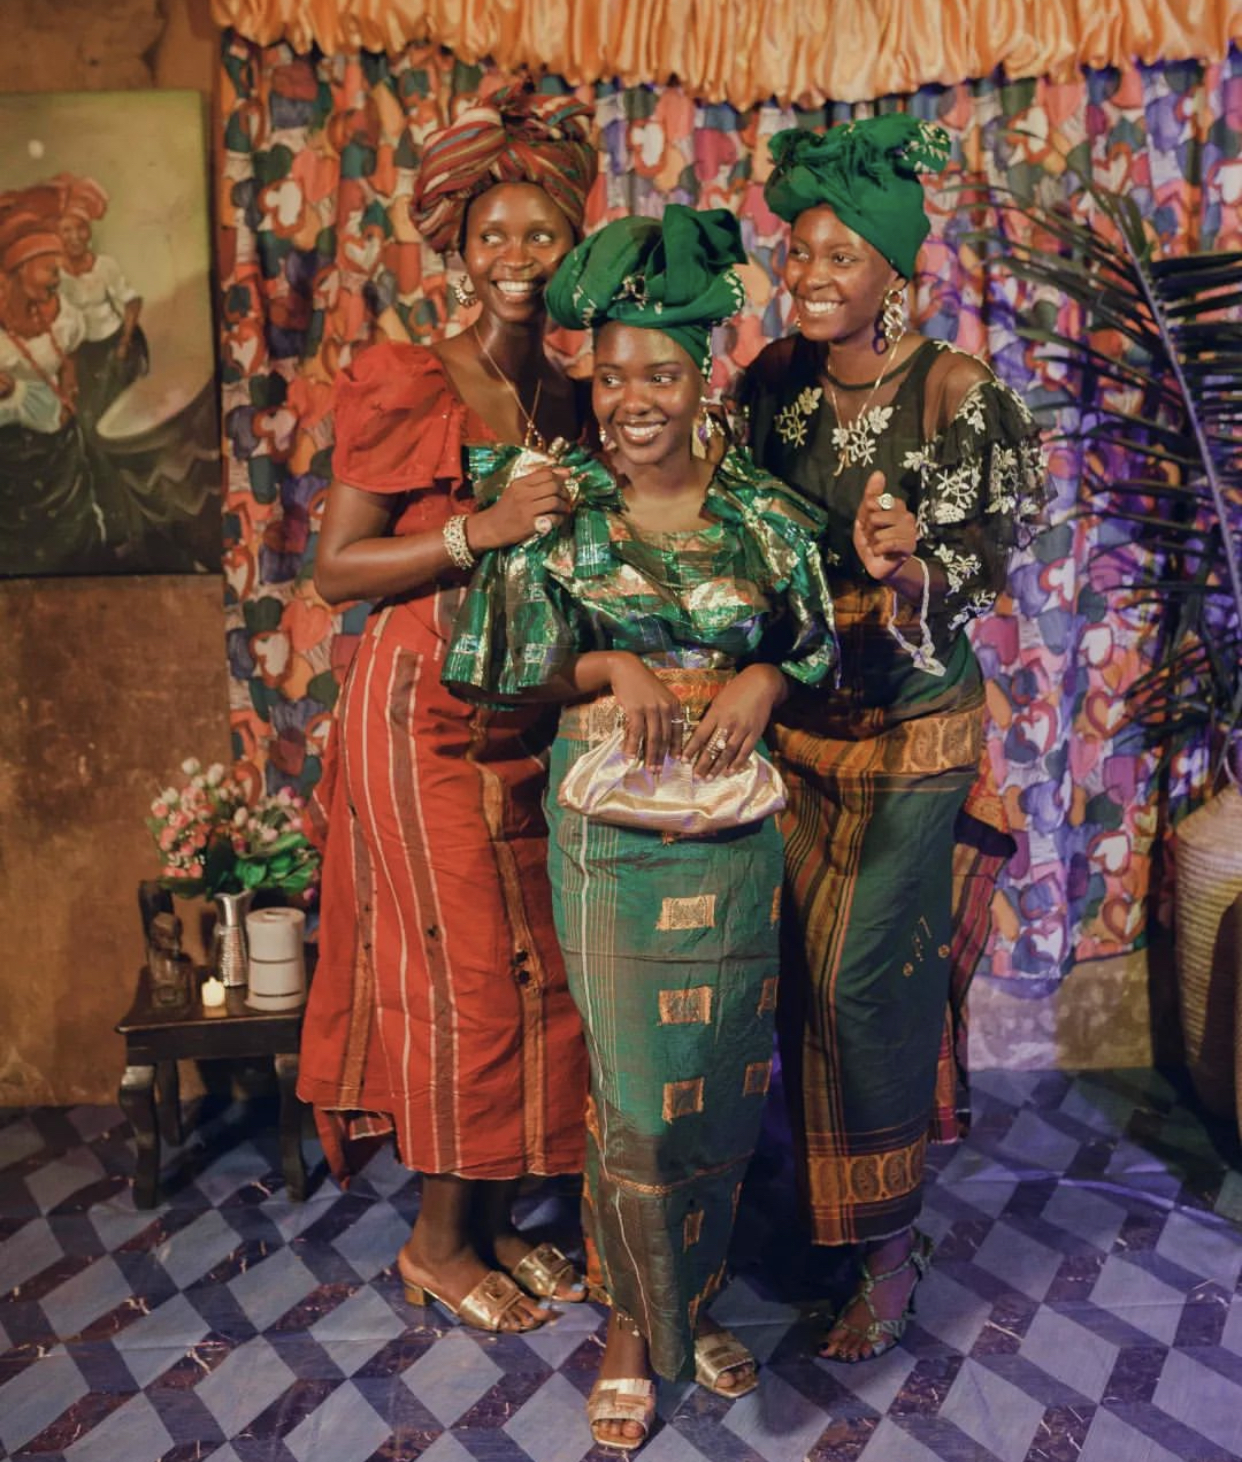 Omonuwa: A photoshoot in honor of the typical traditional fashion sense of Nigerian Women